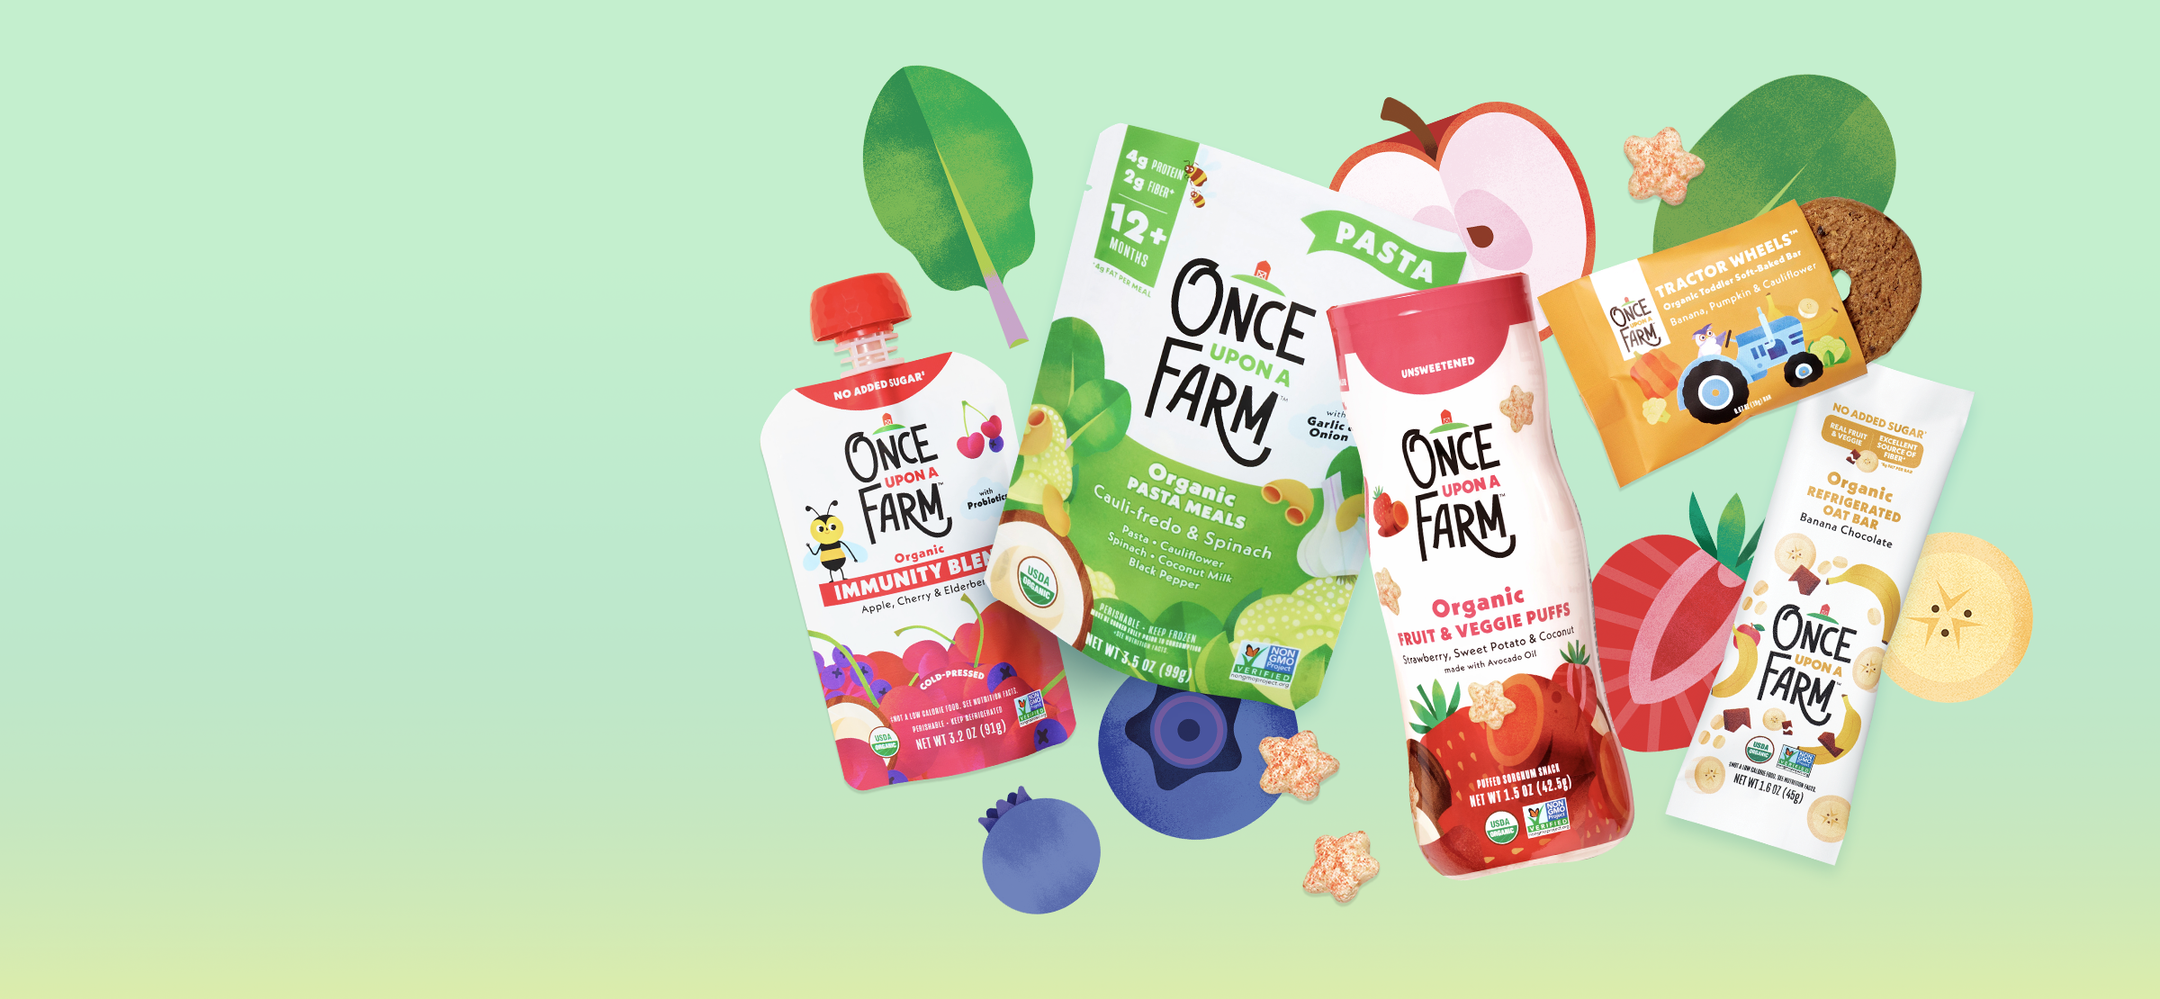 Background image of Once Upon a Farm product spread